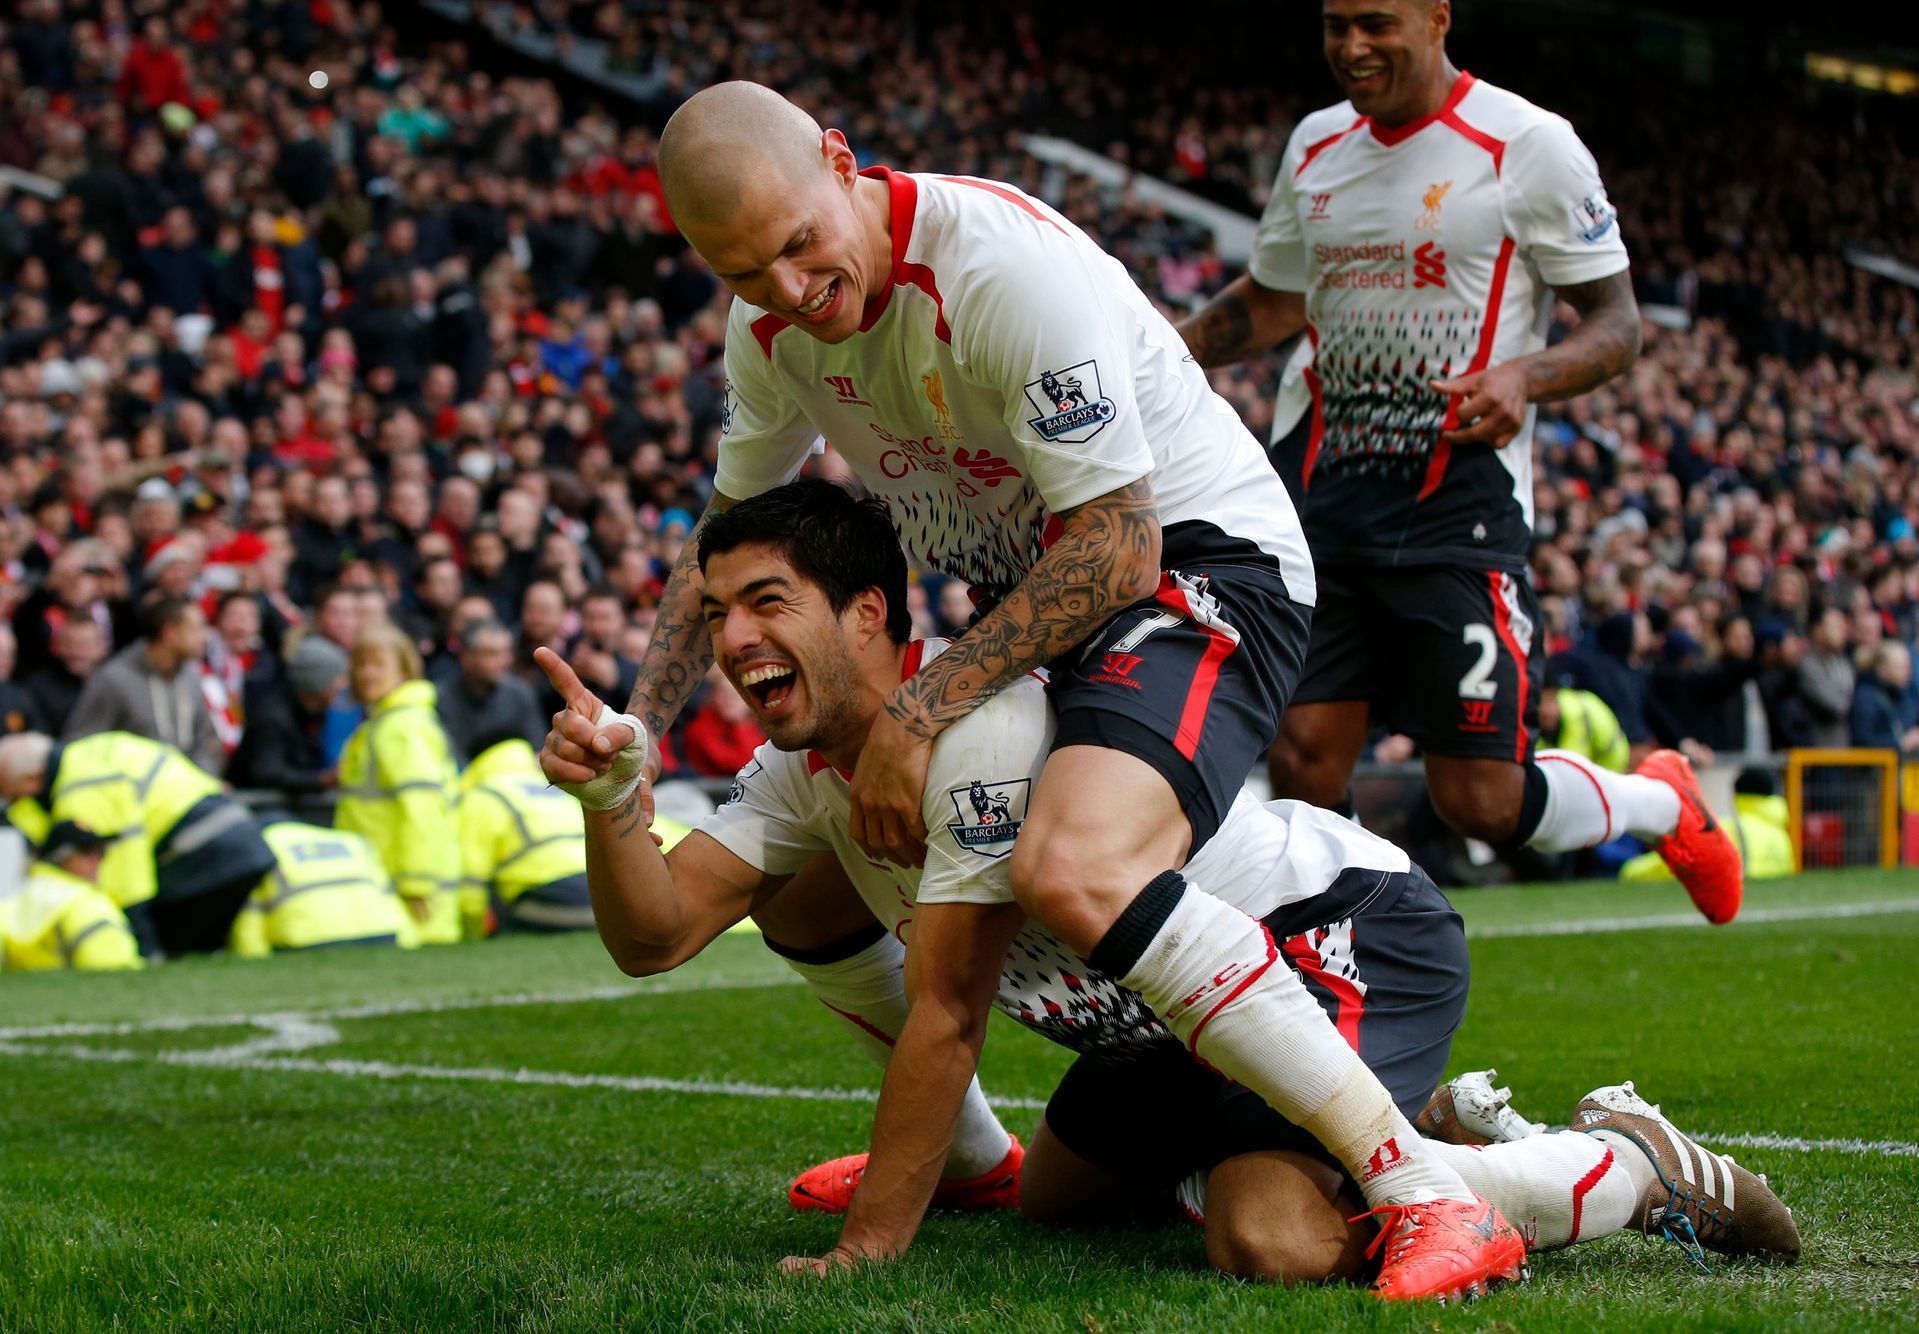 Liverpool's Suarez celebrates his goal against Manchester United with Skrtel during their English Premier League soccer match in Manchester